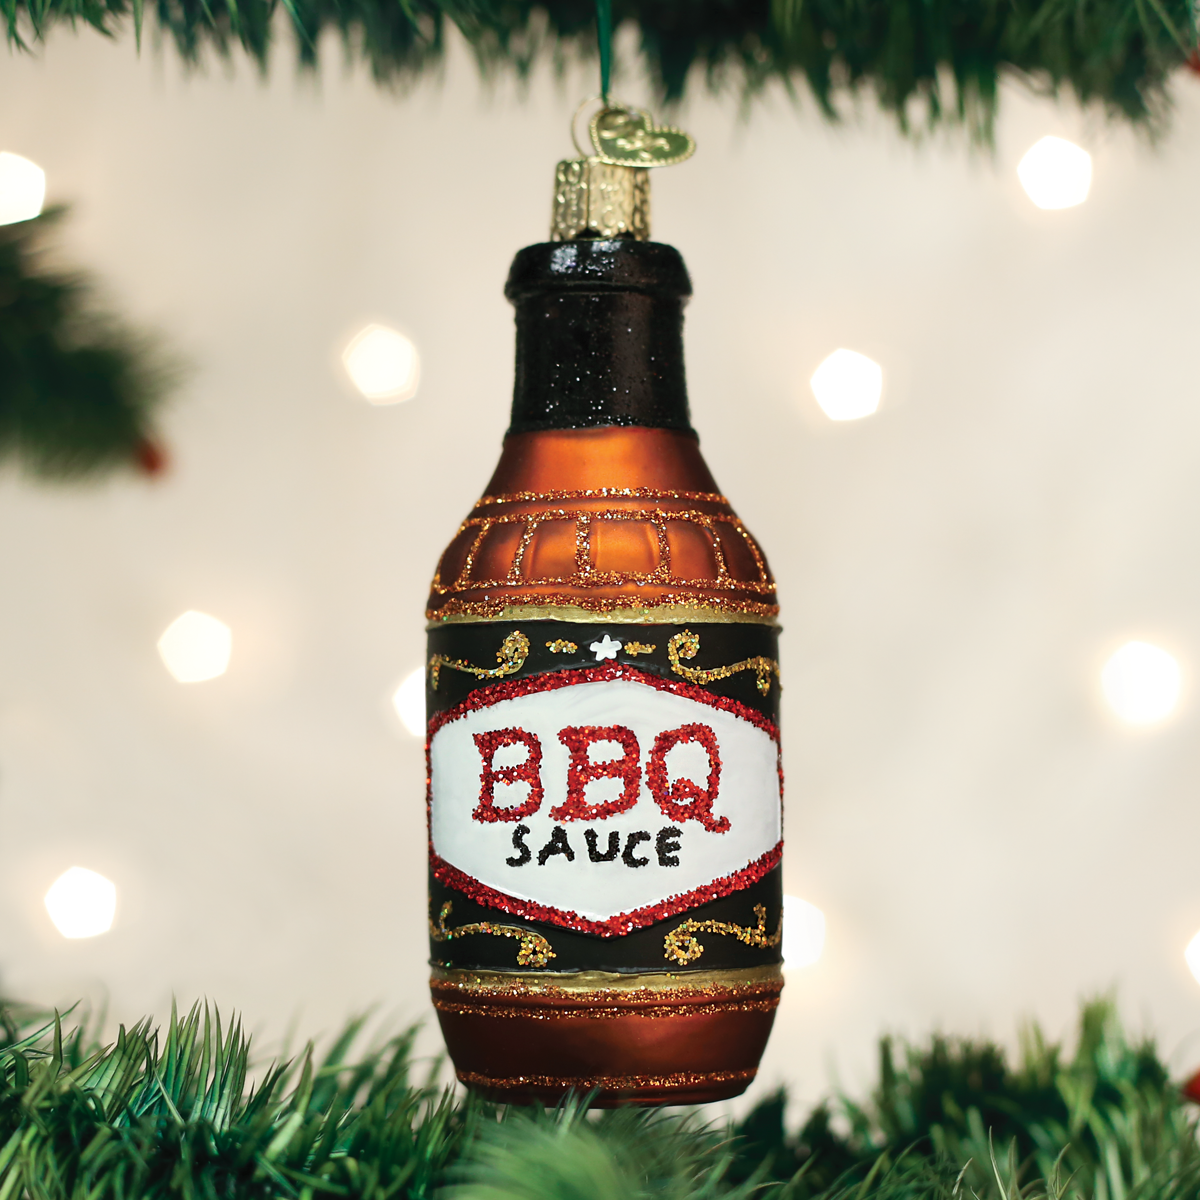 barbeque sauce ornament BBQ glass glitter Old World Christmas Ornaments gift saucy